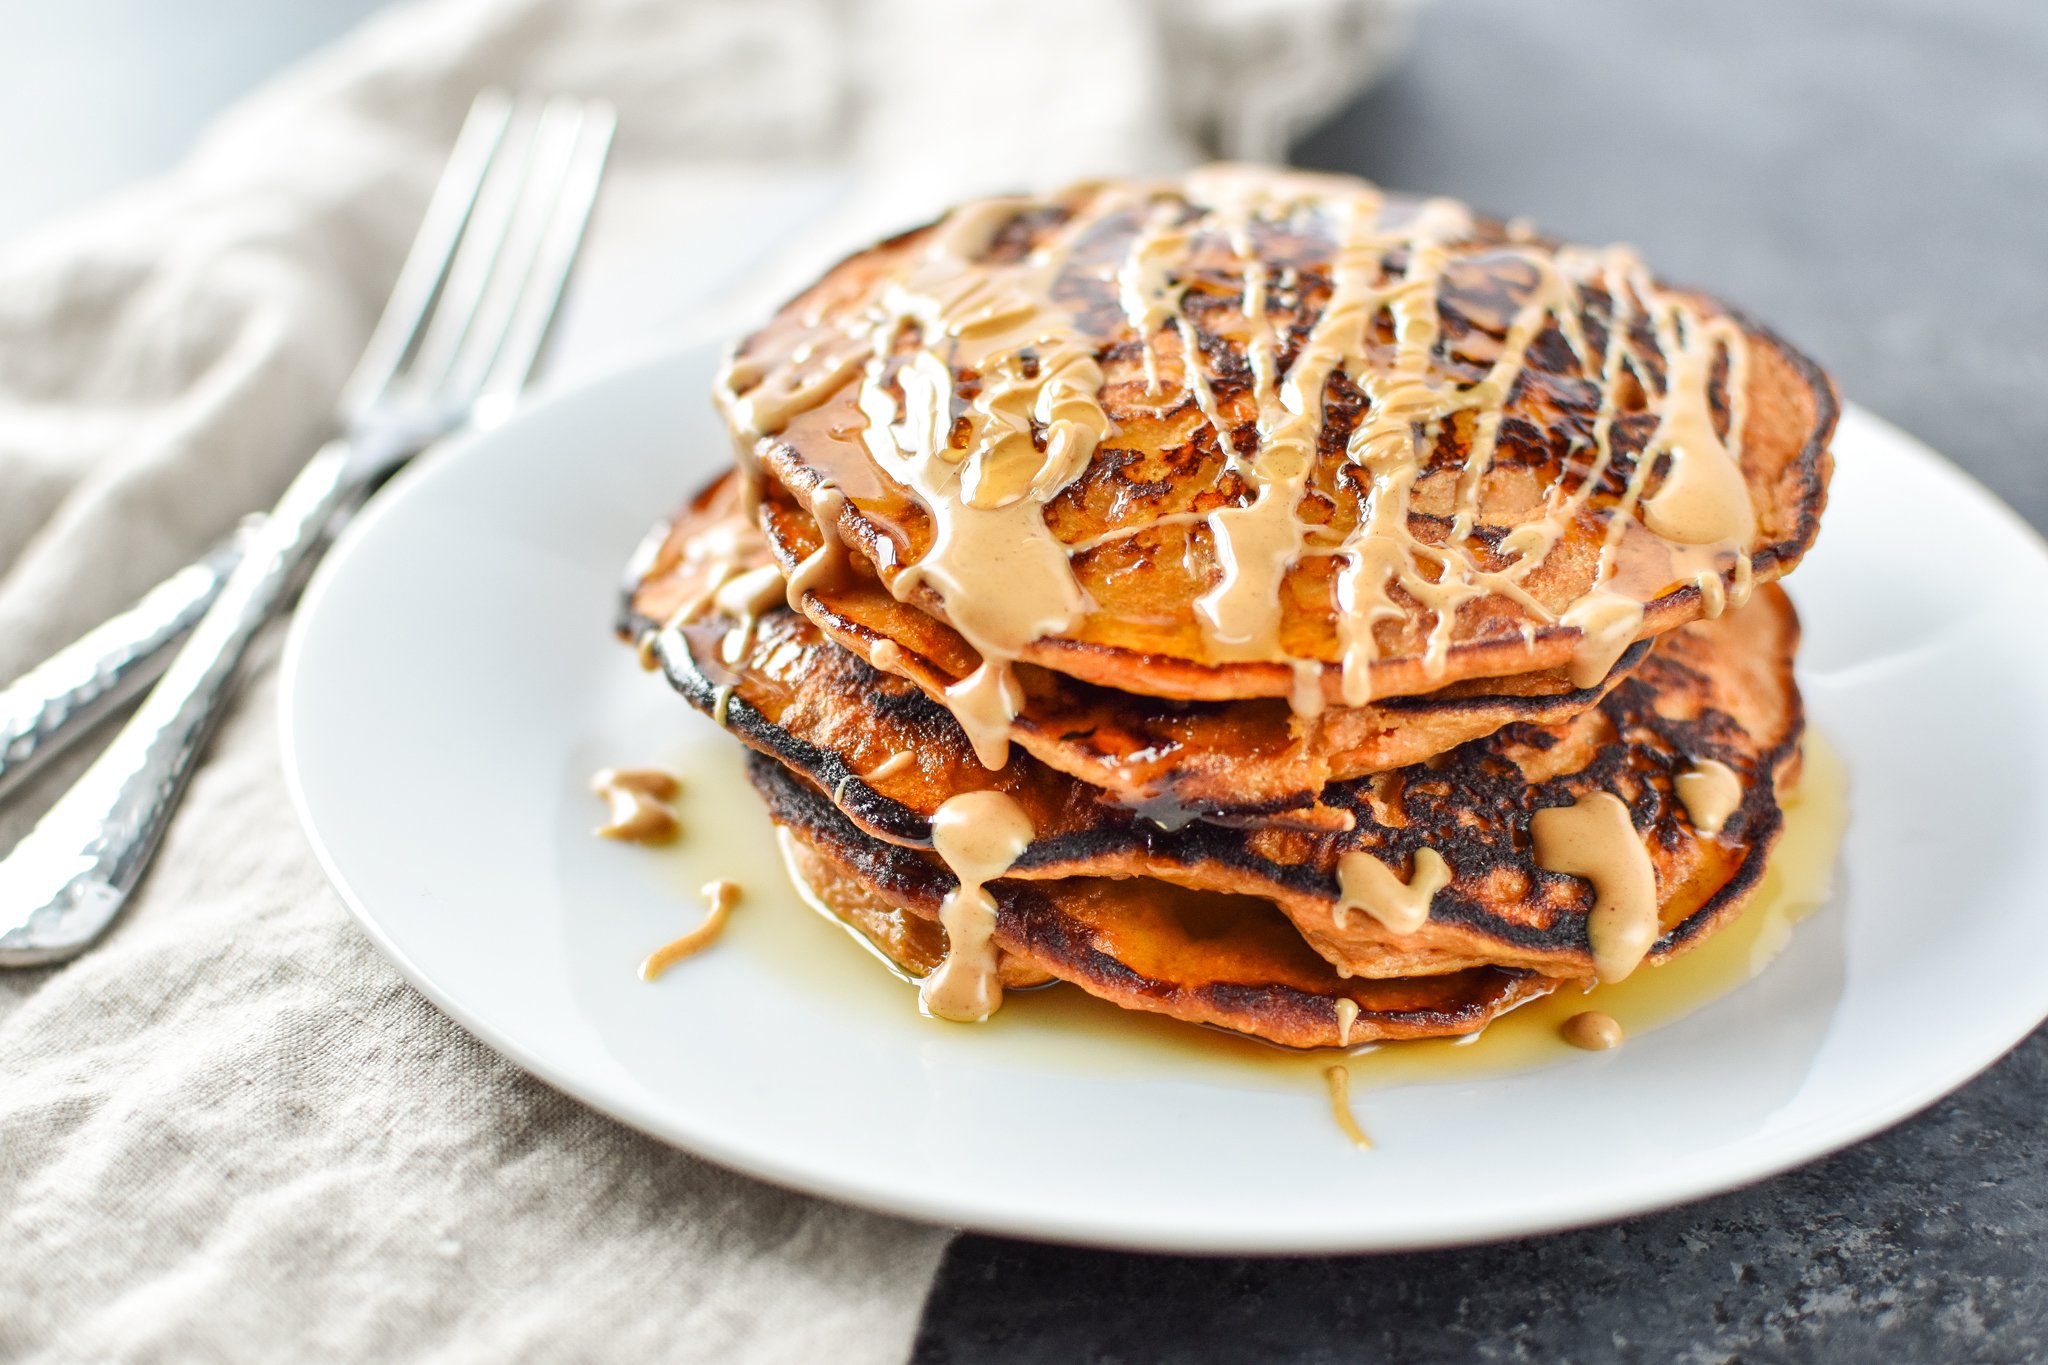 5-Ingredient Sweet Potato Banana Pancakes - Banana, sweet potato, nut butter, eggs and cinnamon are all you need to make these simple pancakes happen. - ProjectMealPlan.com